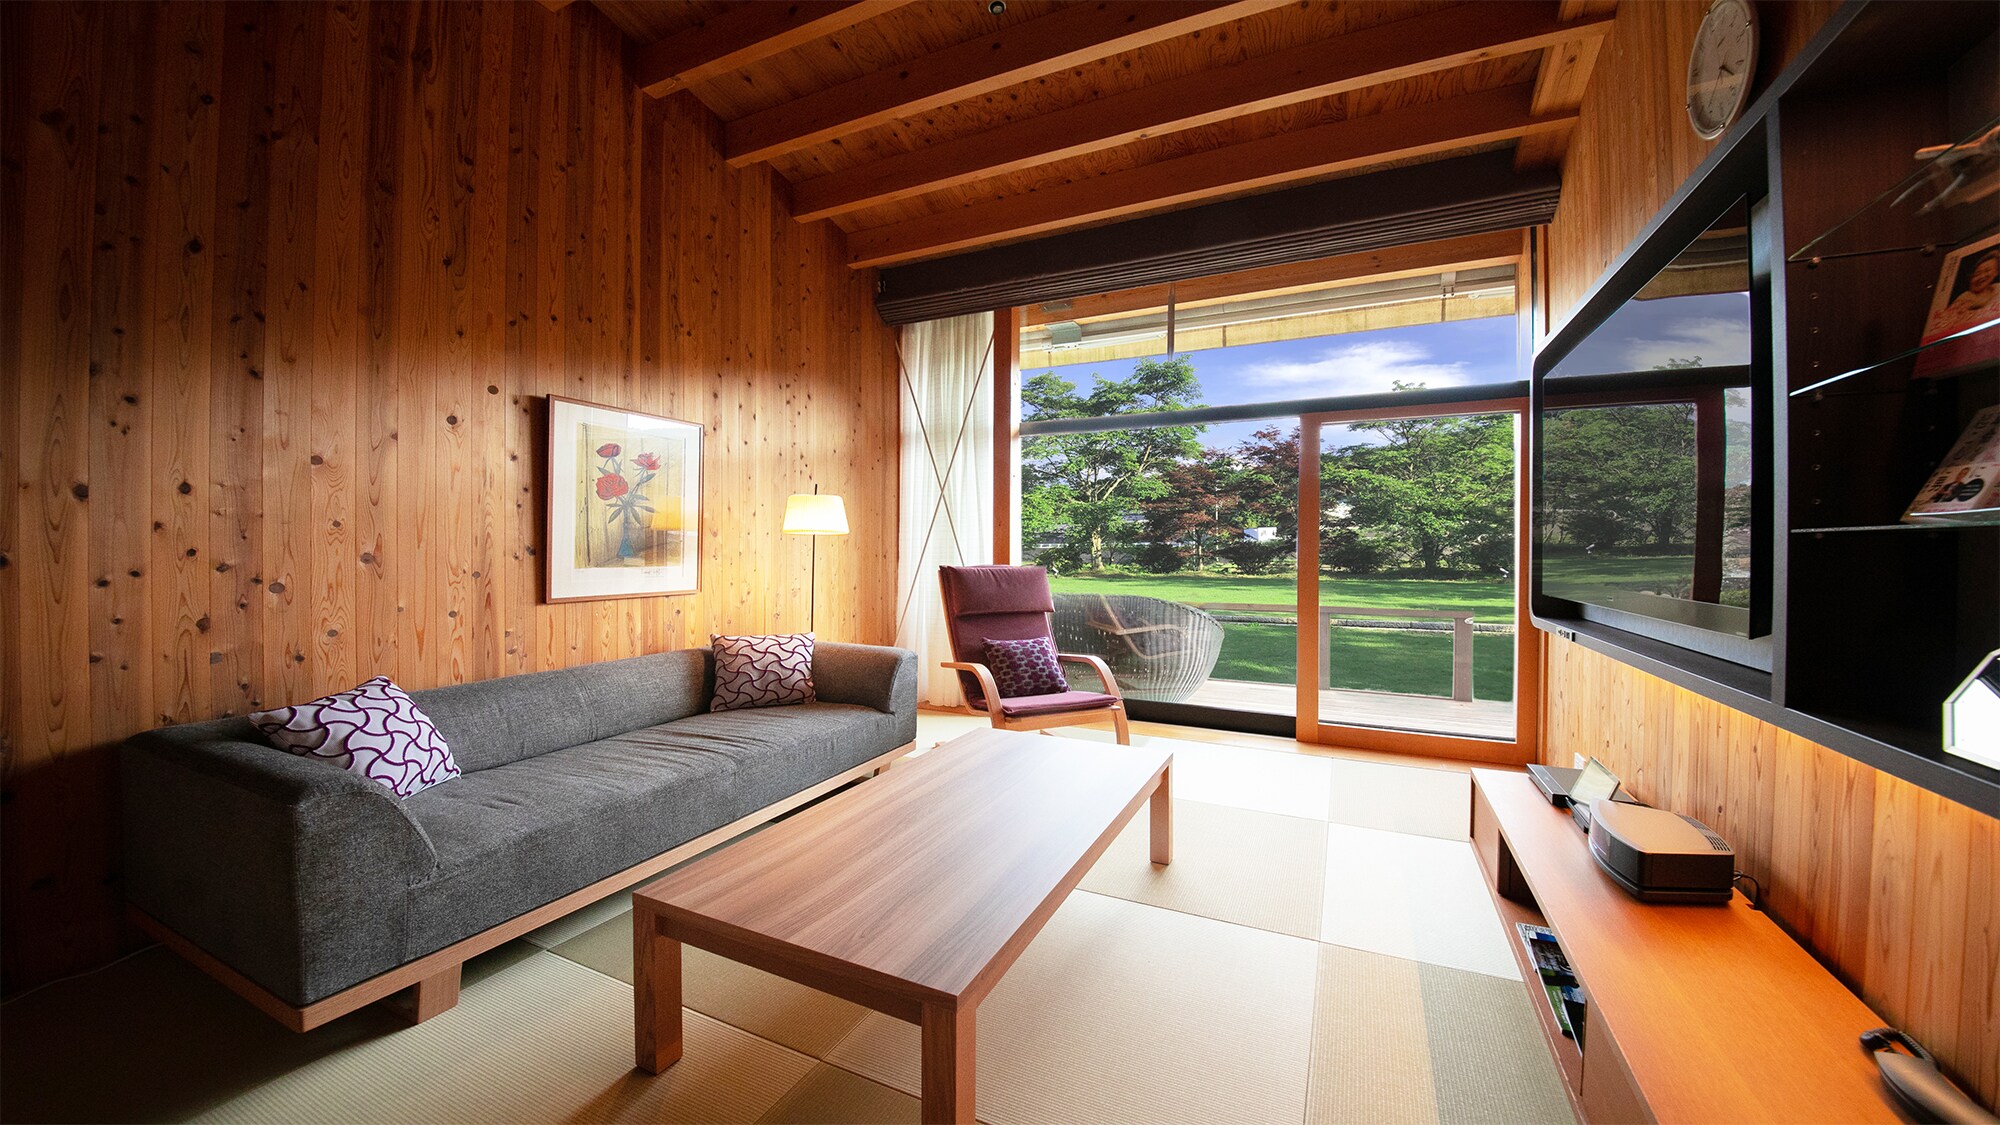 ■ Suite Room-Japanese Living ■ Received the 2015 Good Design Award. & rdquo; Japanese-Western fusion space design & rdquo;